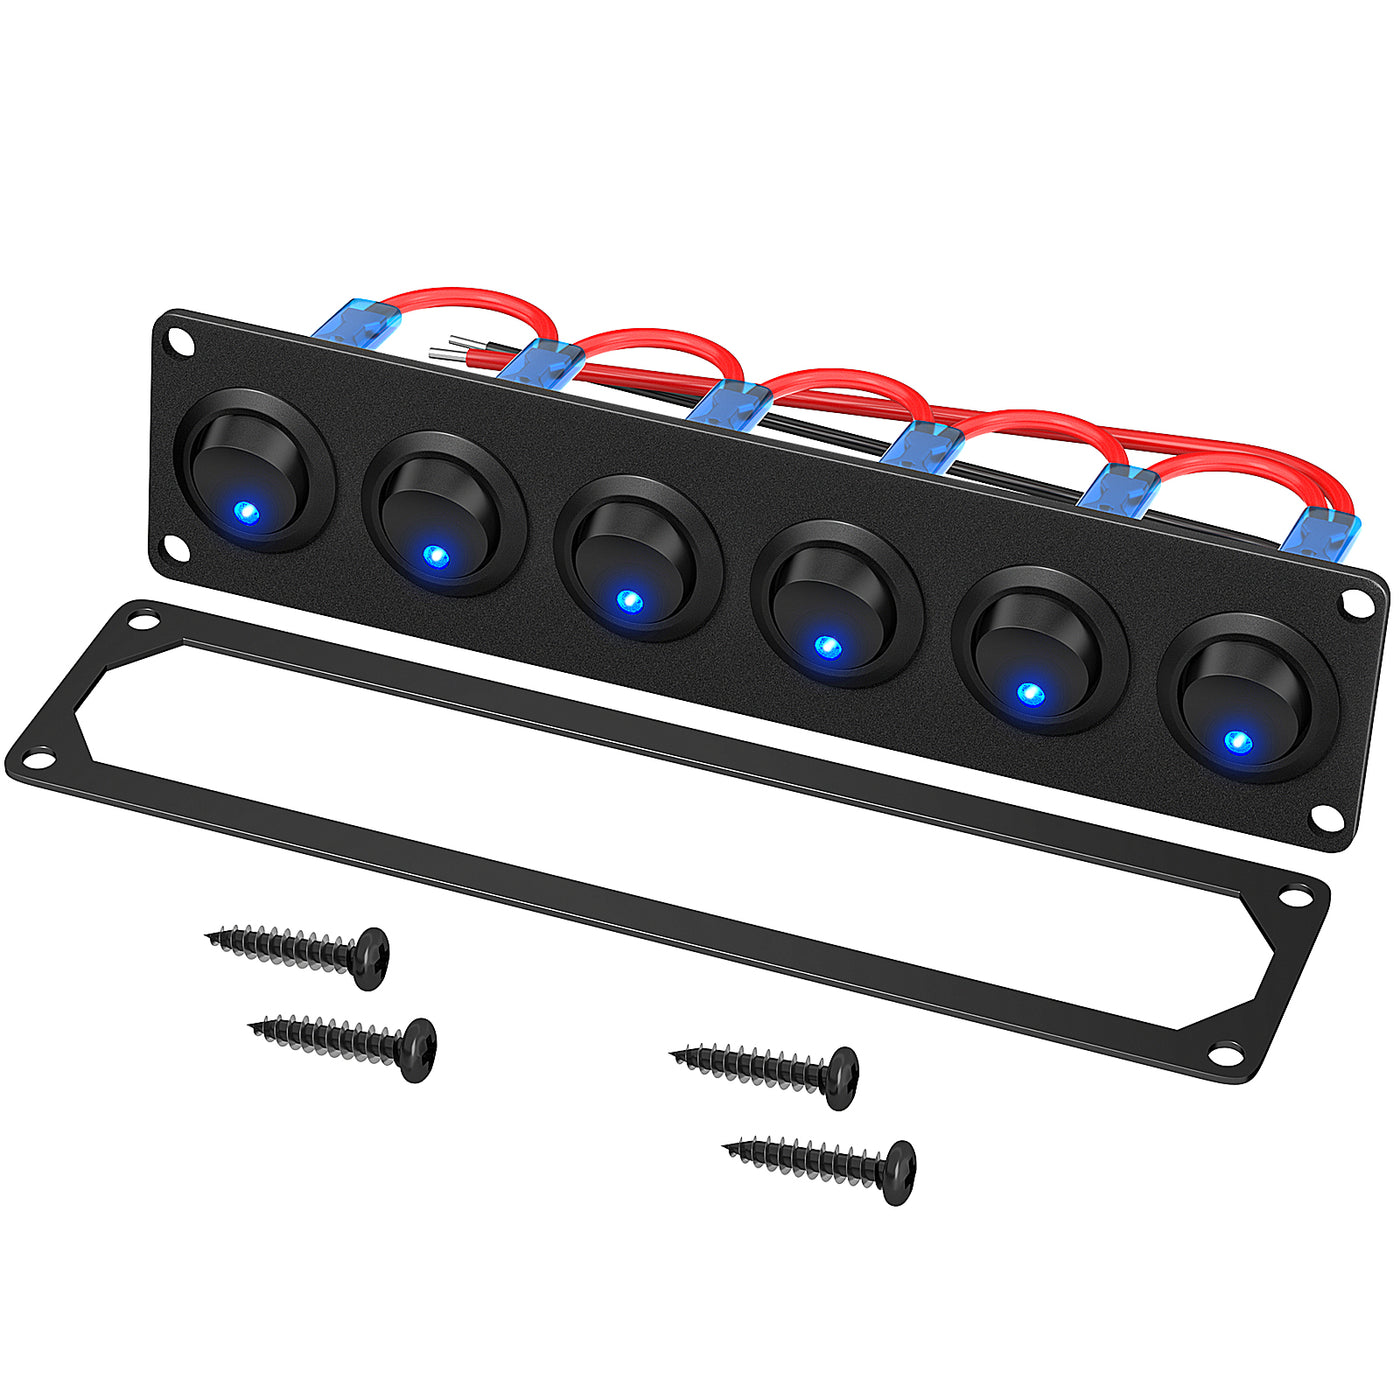 12VDC 20A SPST ON OFF 6 Gang Round Rocker Switch Panel with Dot LED